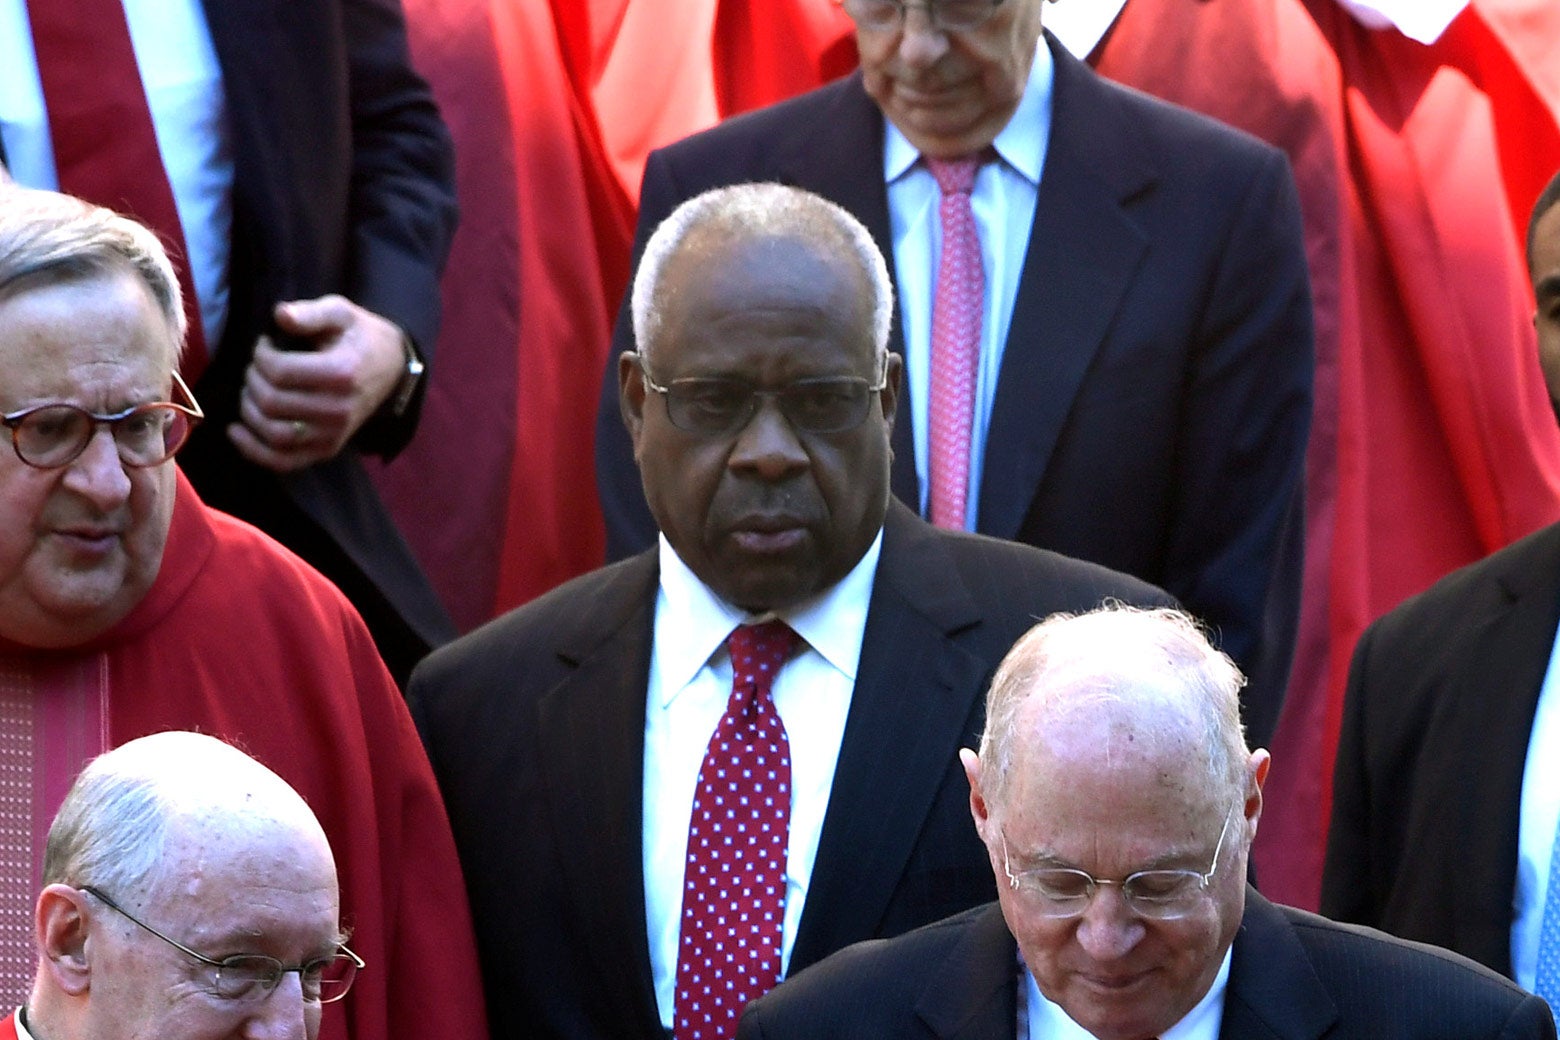  Justice Clarence Thomas.